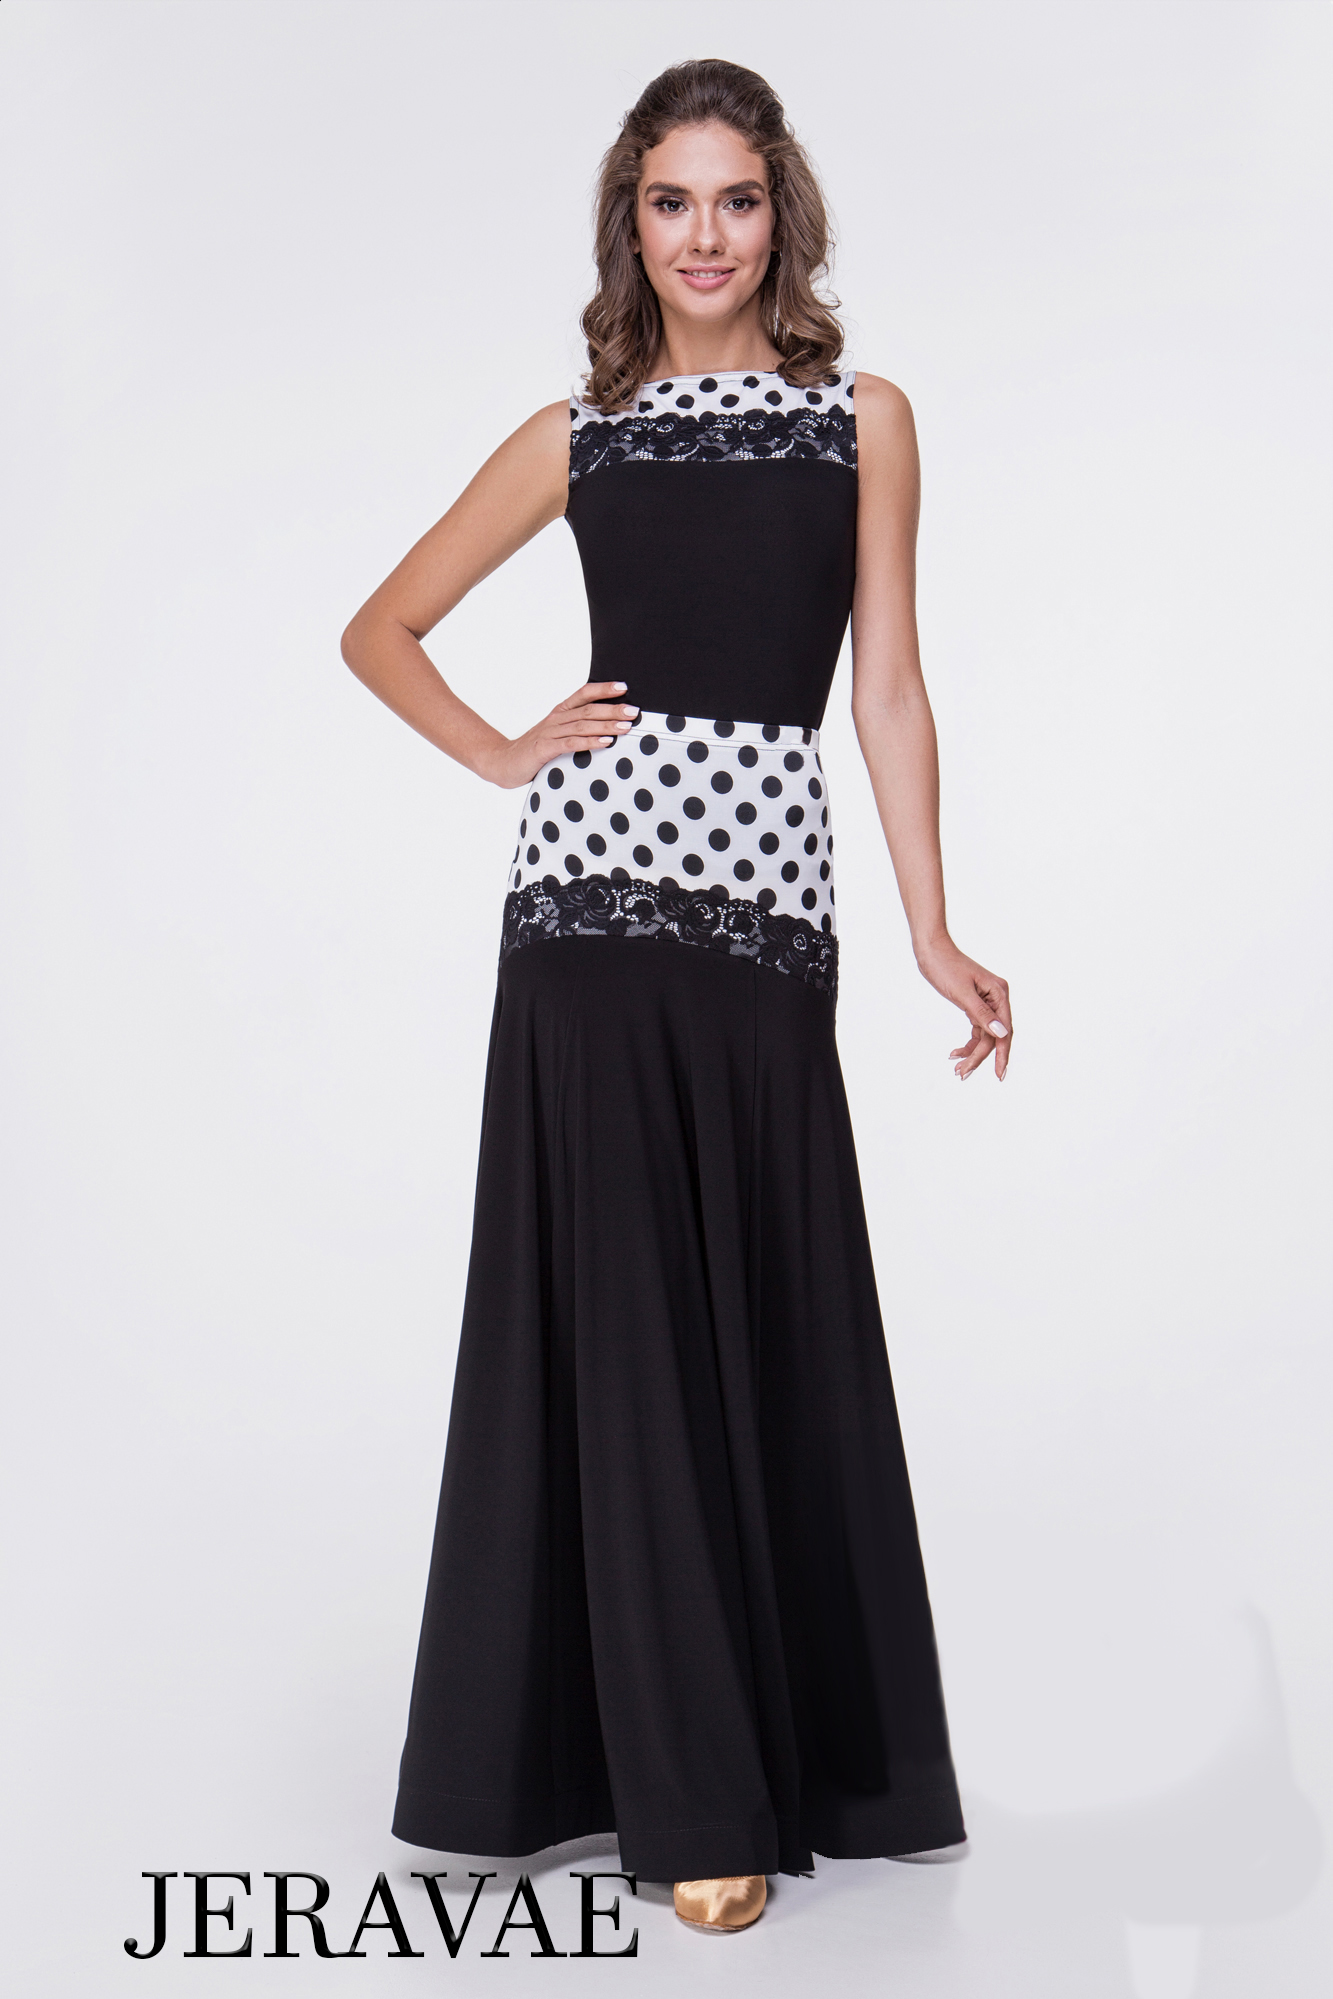 White and Black Polka Dot Ballroom Practice Skirt with Lace Accent and Matching Sleeveless Practice Top